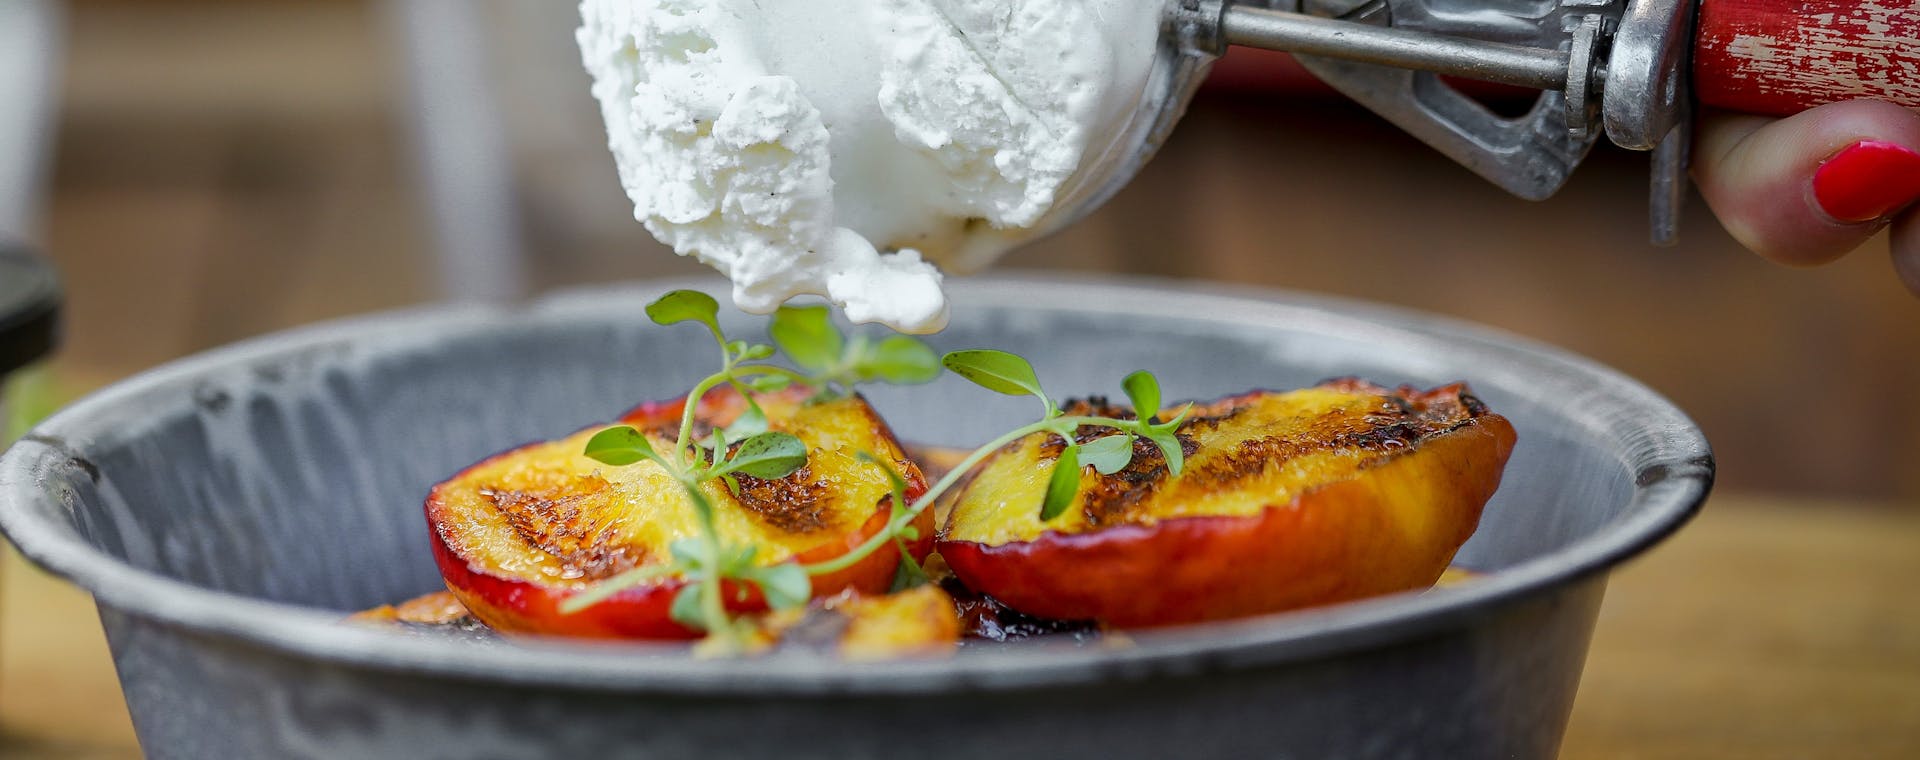 Grilled Peaches with Epicurean Butter Honey Flavored Butter